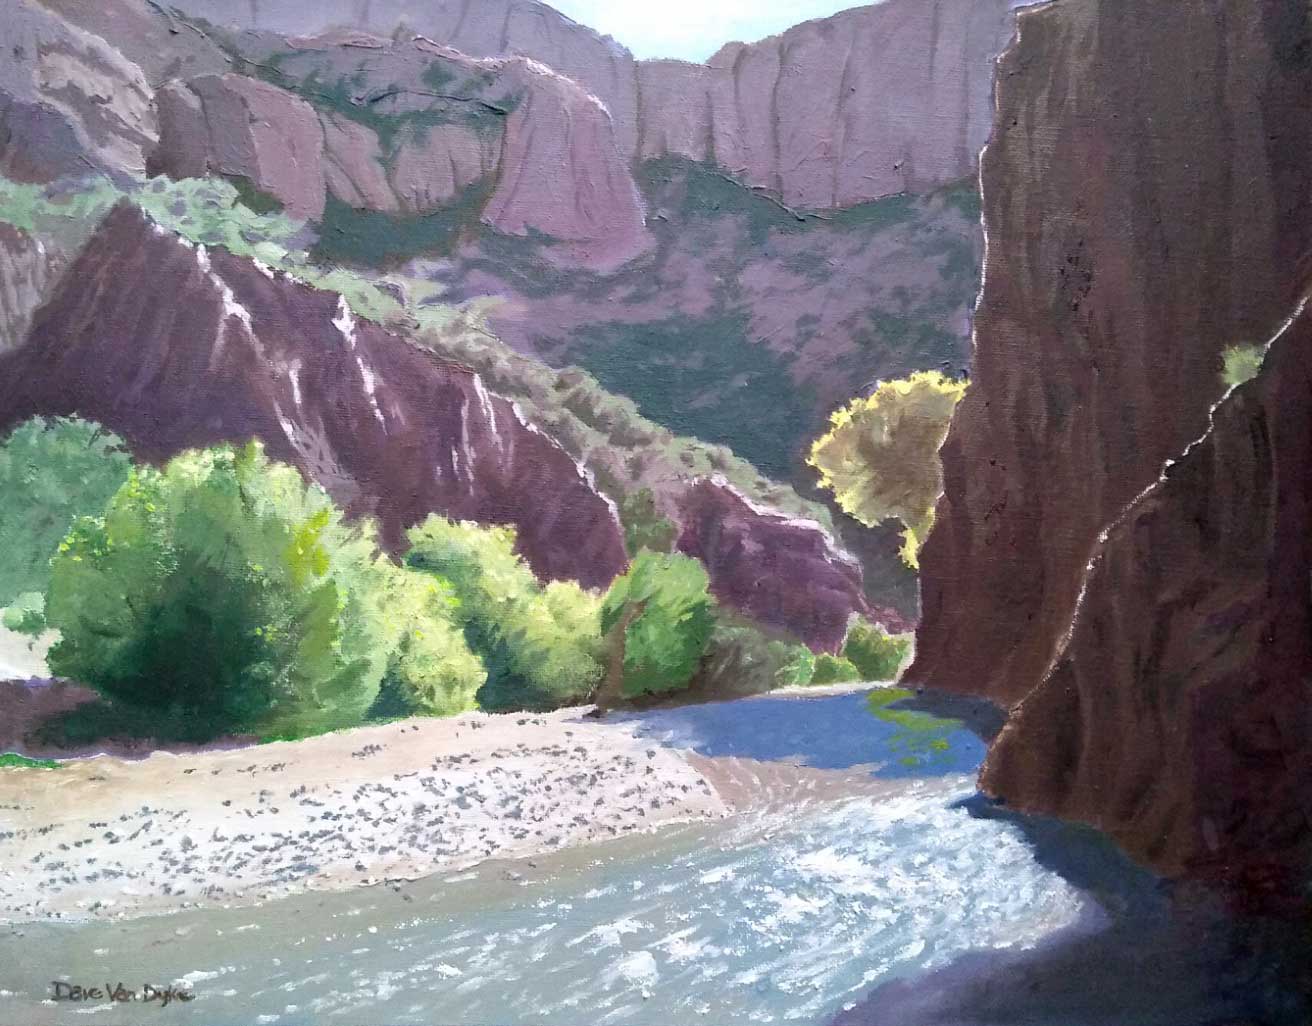 Painting by Dave Van Dyke - river canyon